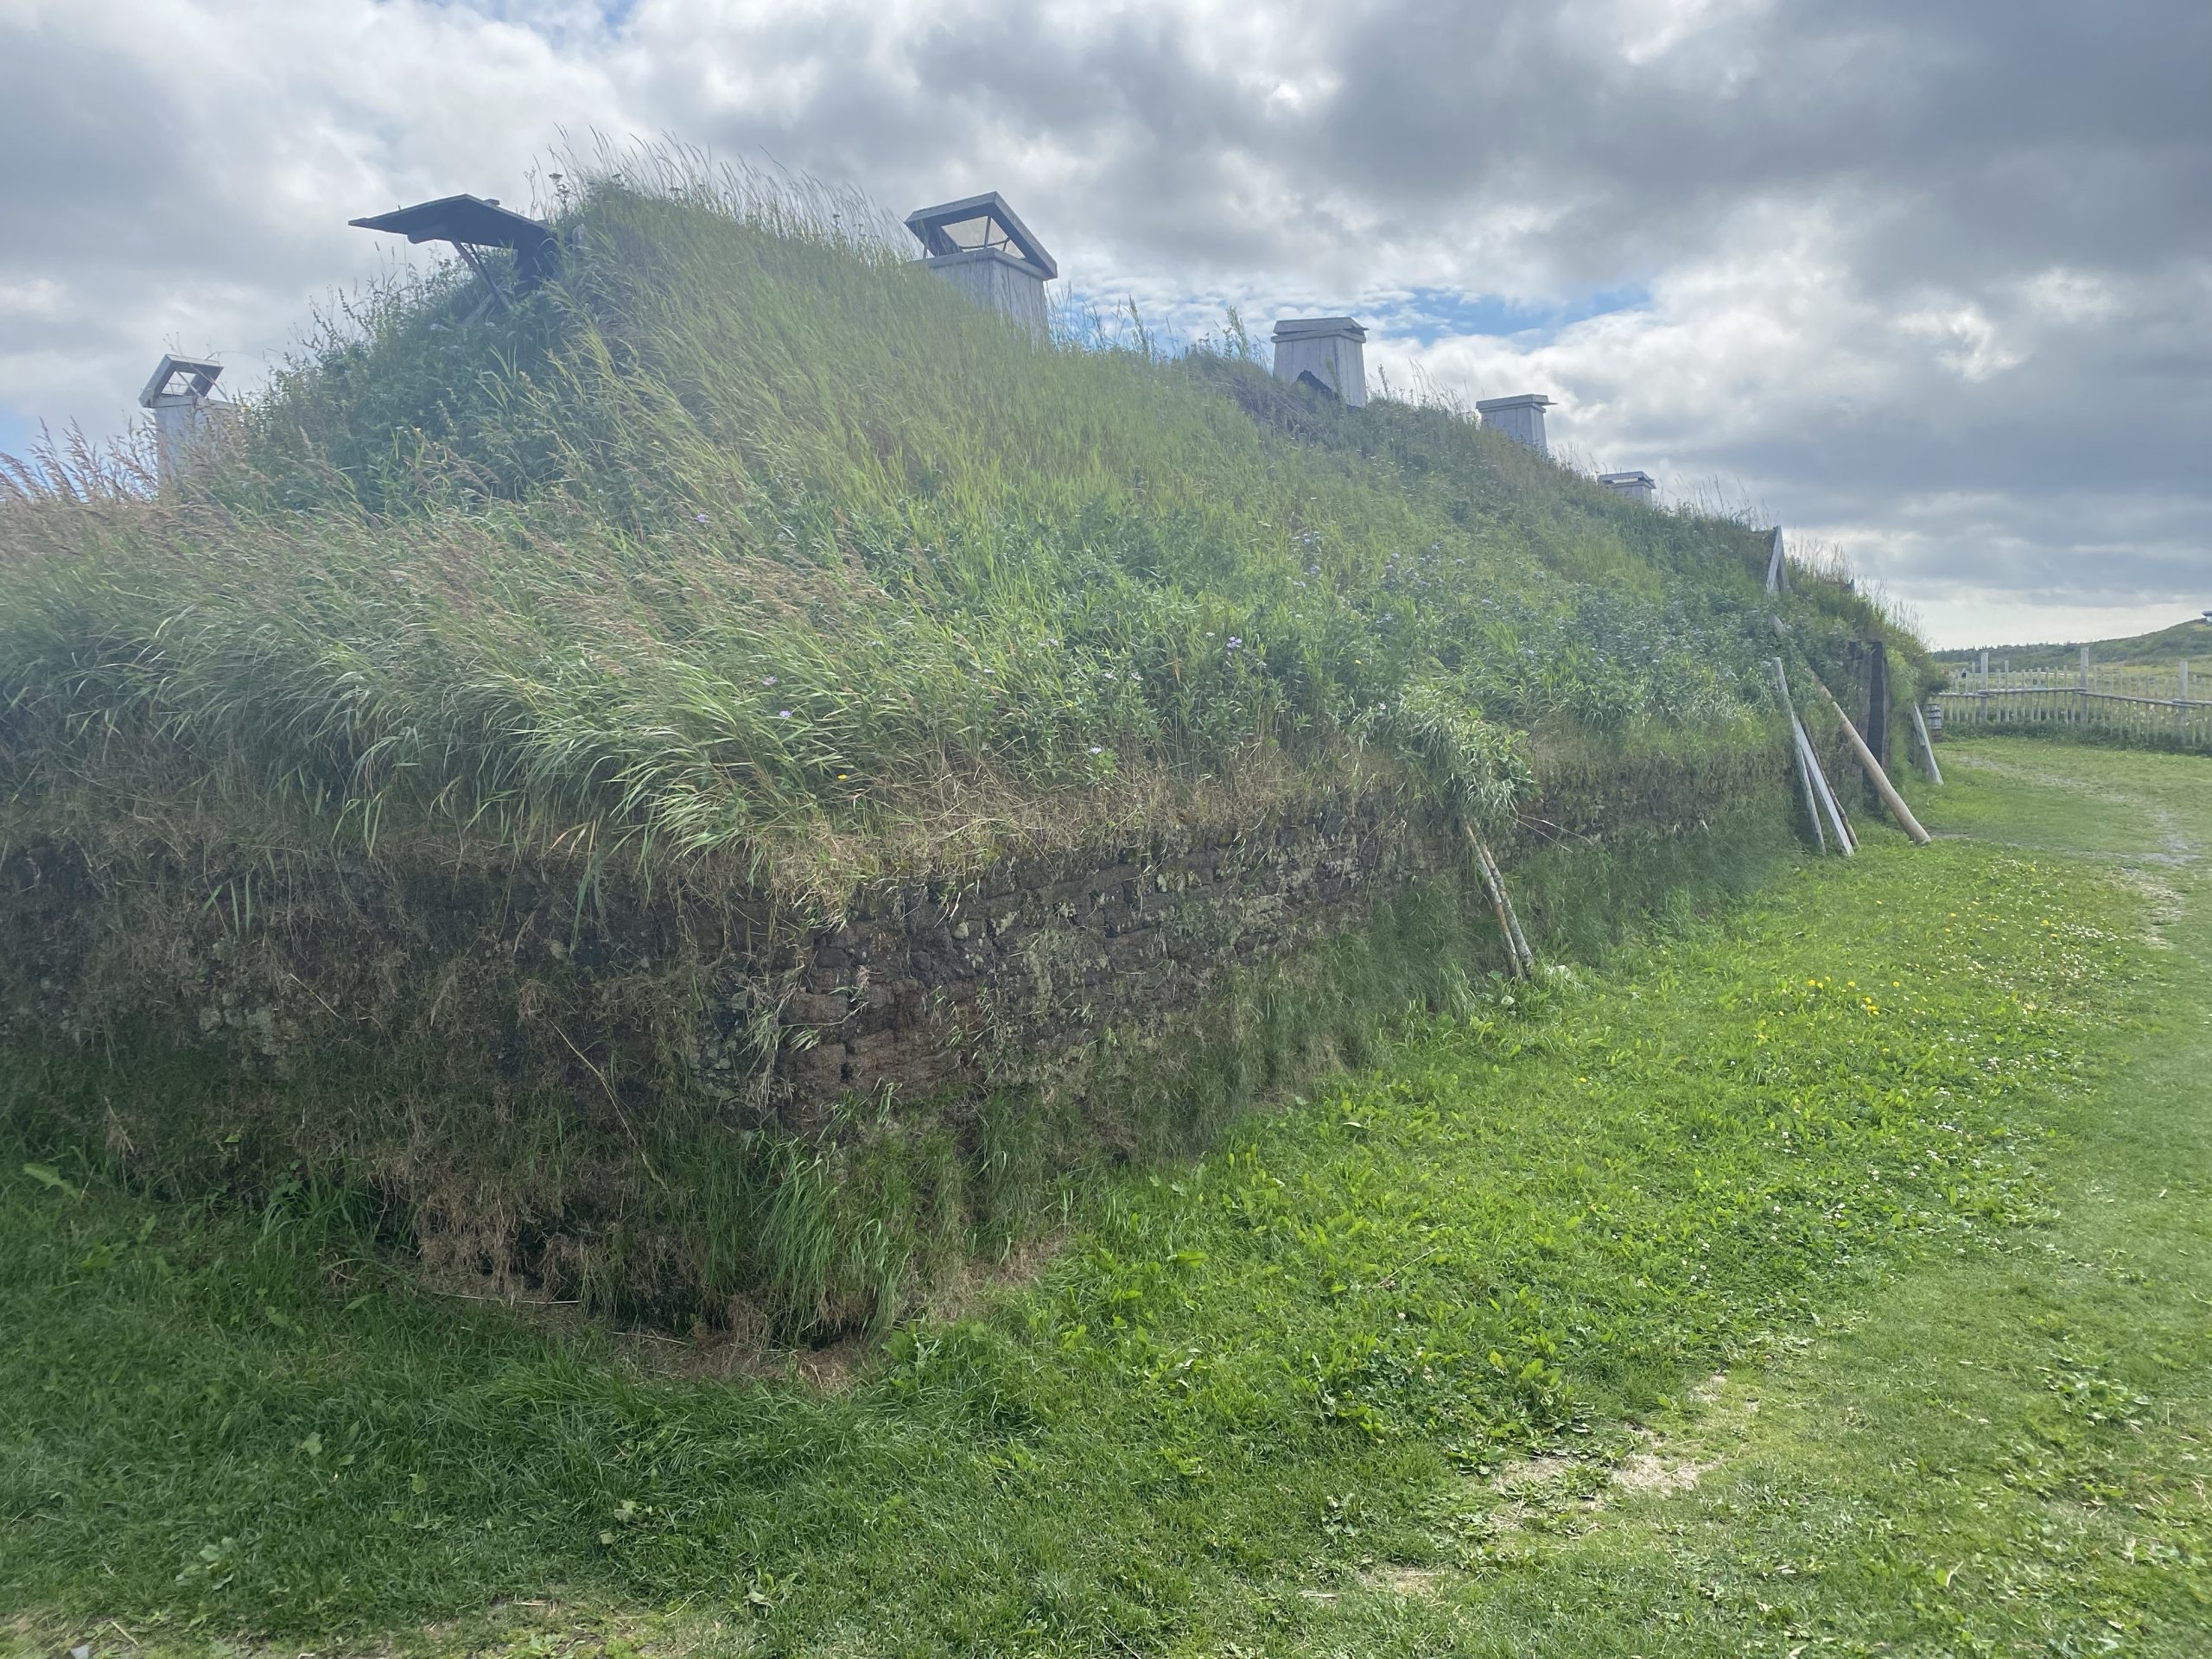 A side view of a re-creation of a 1,000 year old Norse sod house.